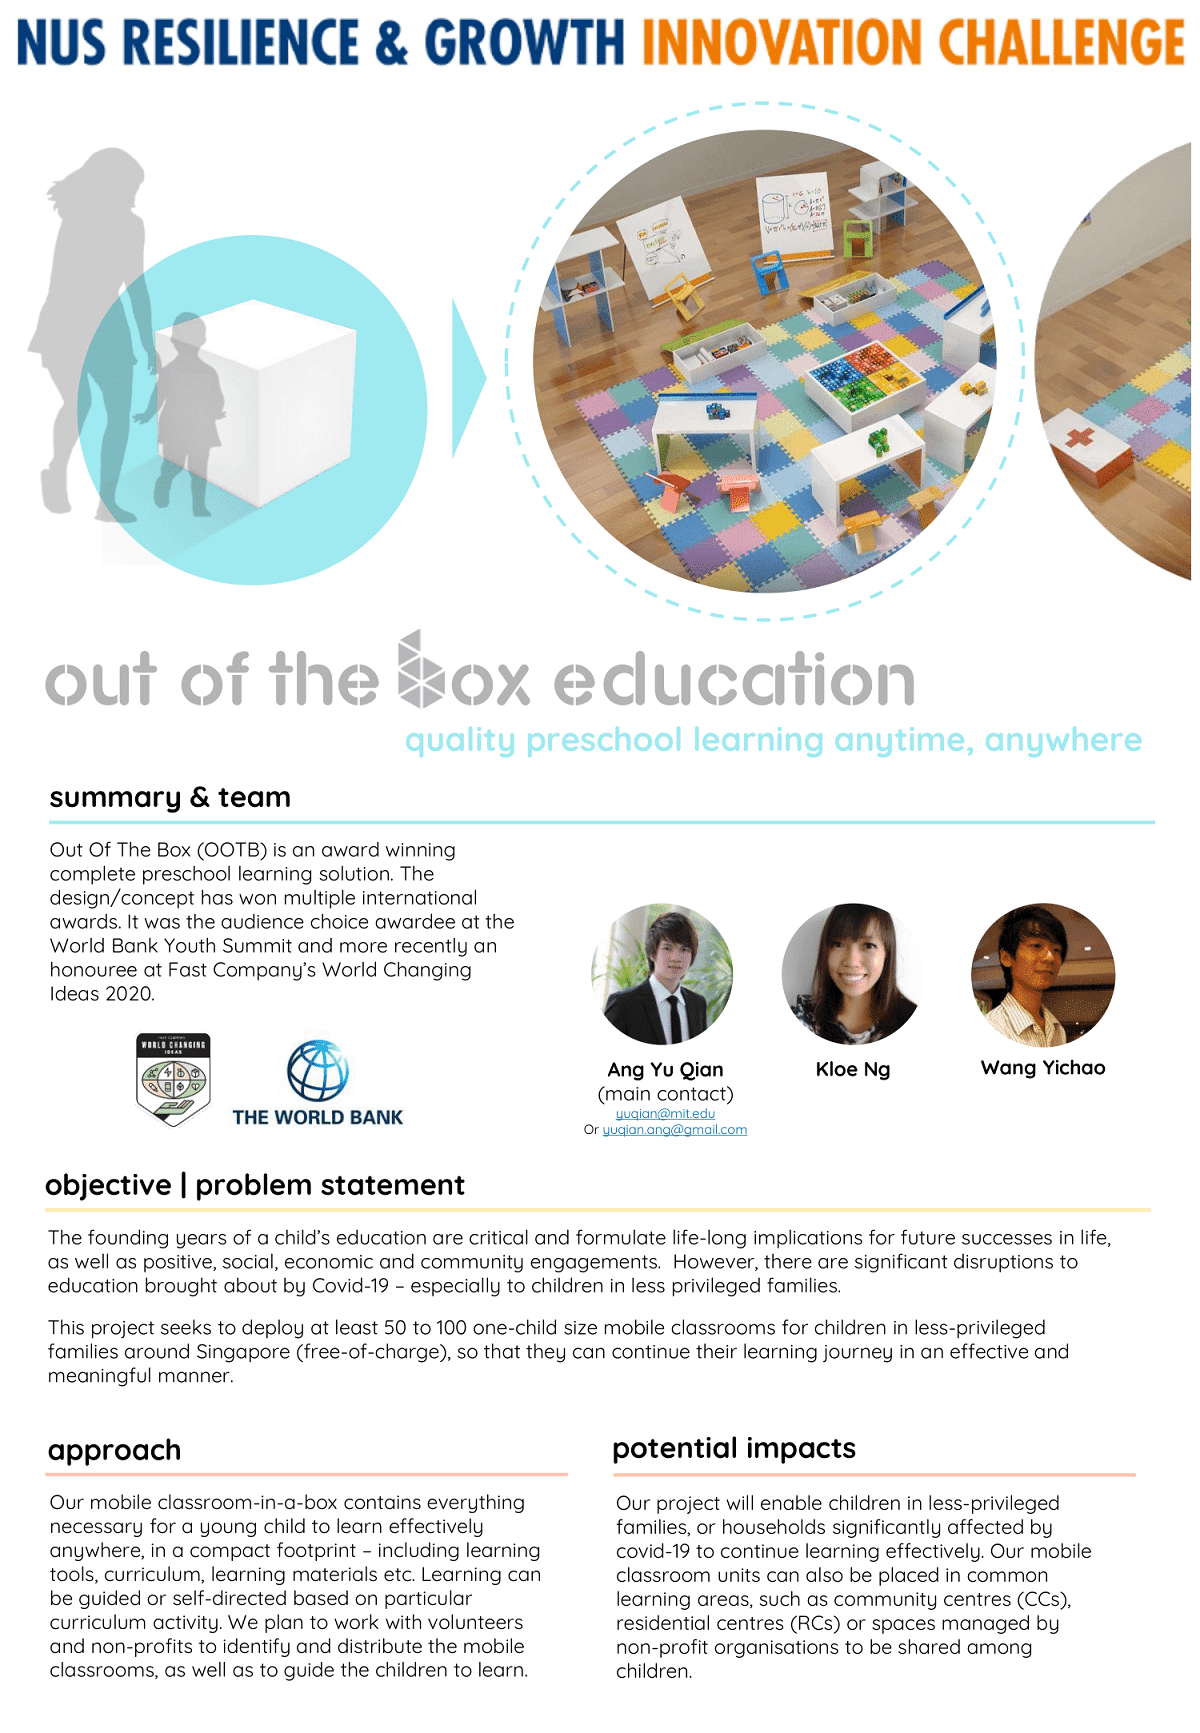 RG098 - Out of the Box Education